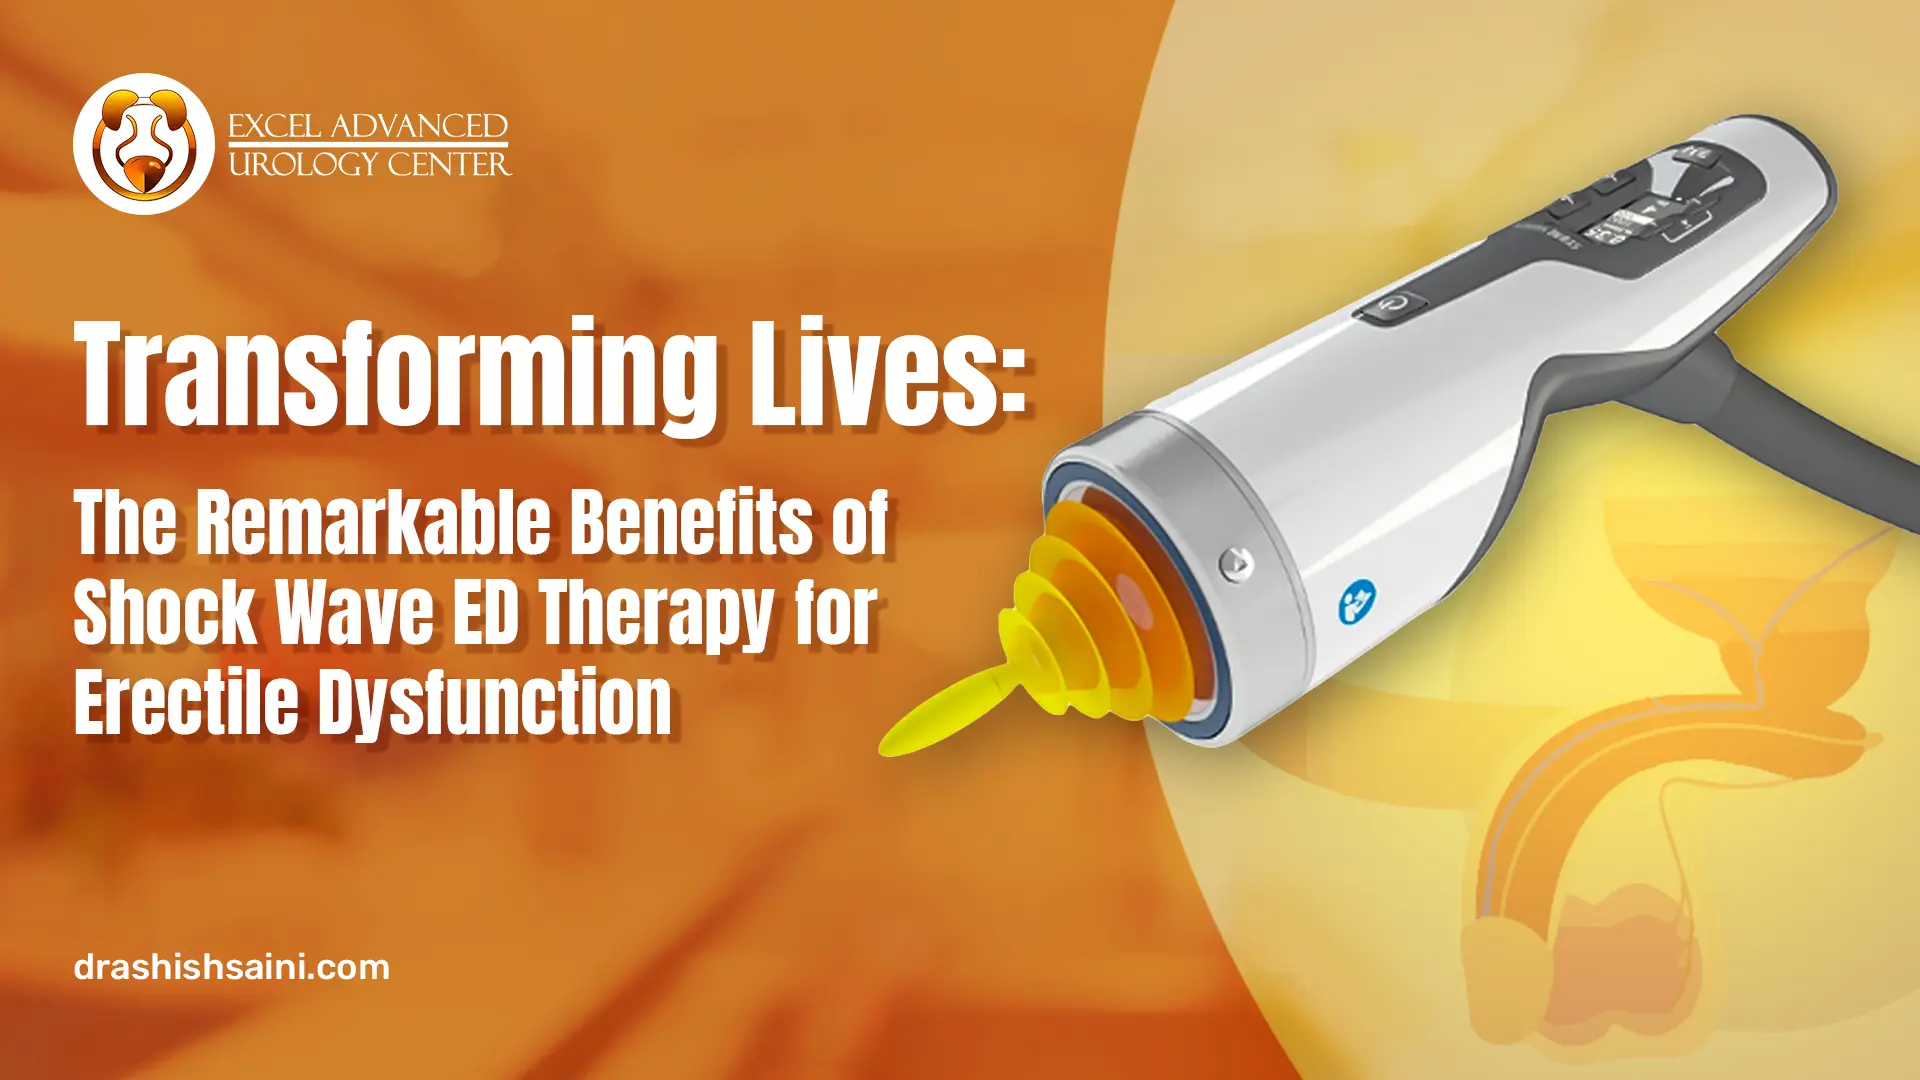 Transforming Lives: The Remarkable Benefits of Shock Wave ED Therapy for Erectile Dysfunction